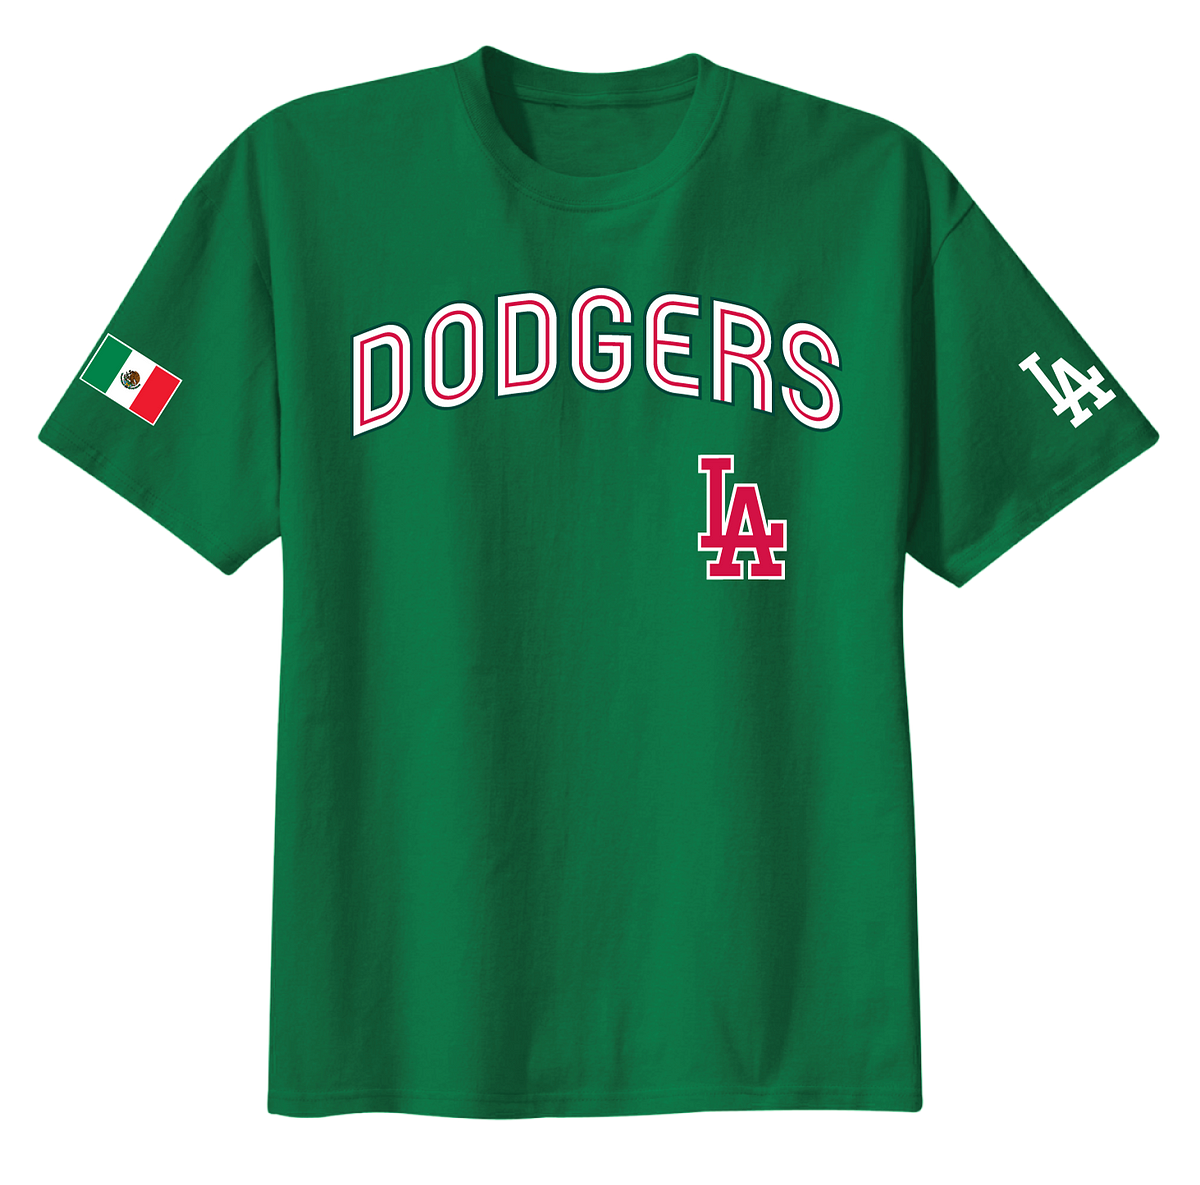 mexico dodgers jersey 2019